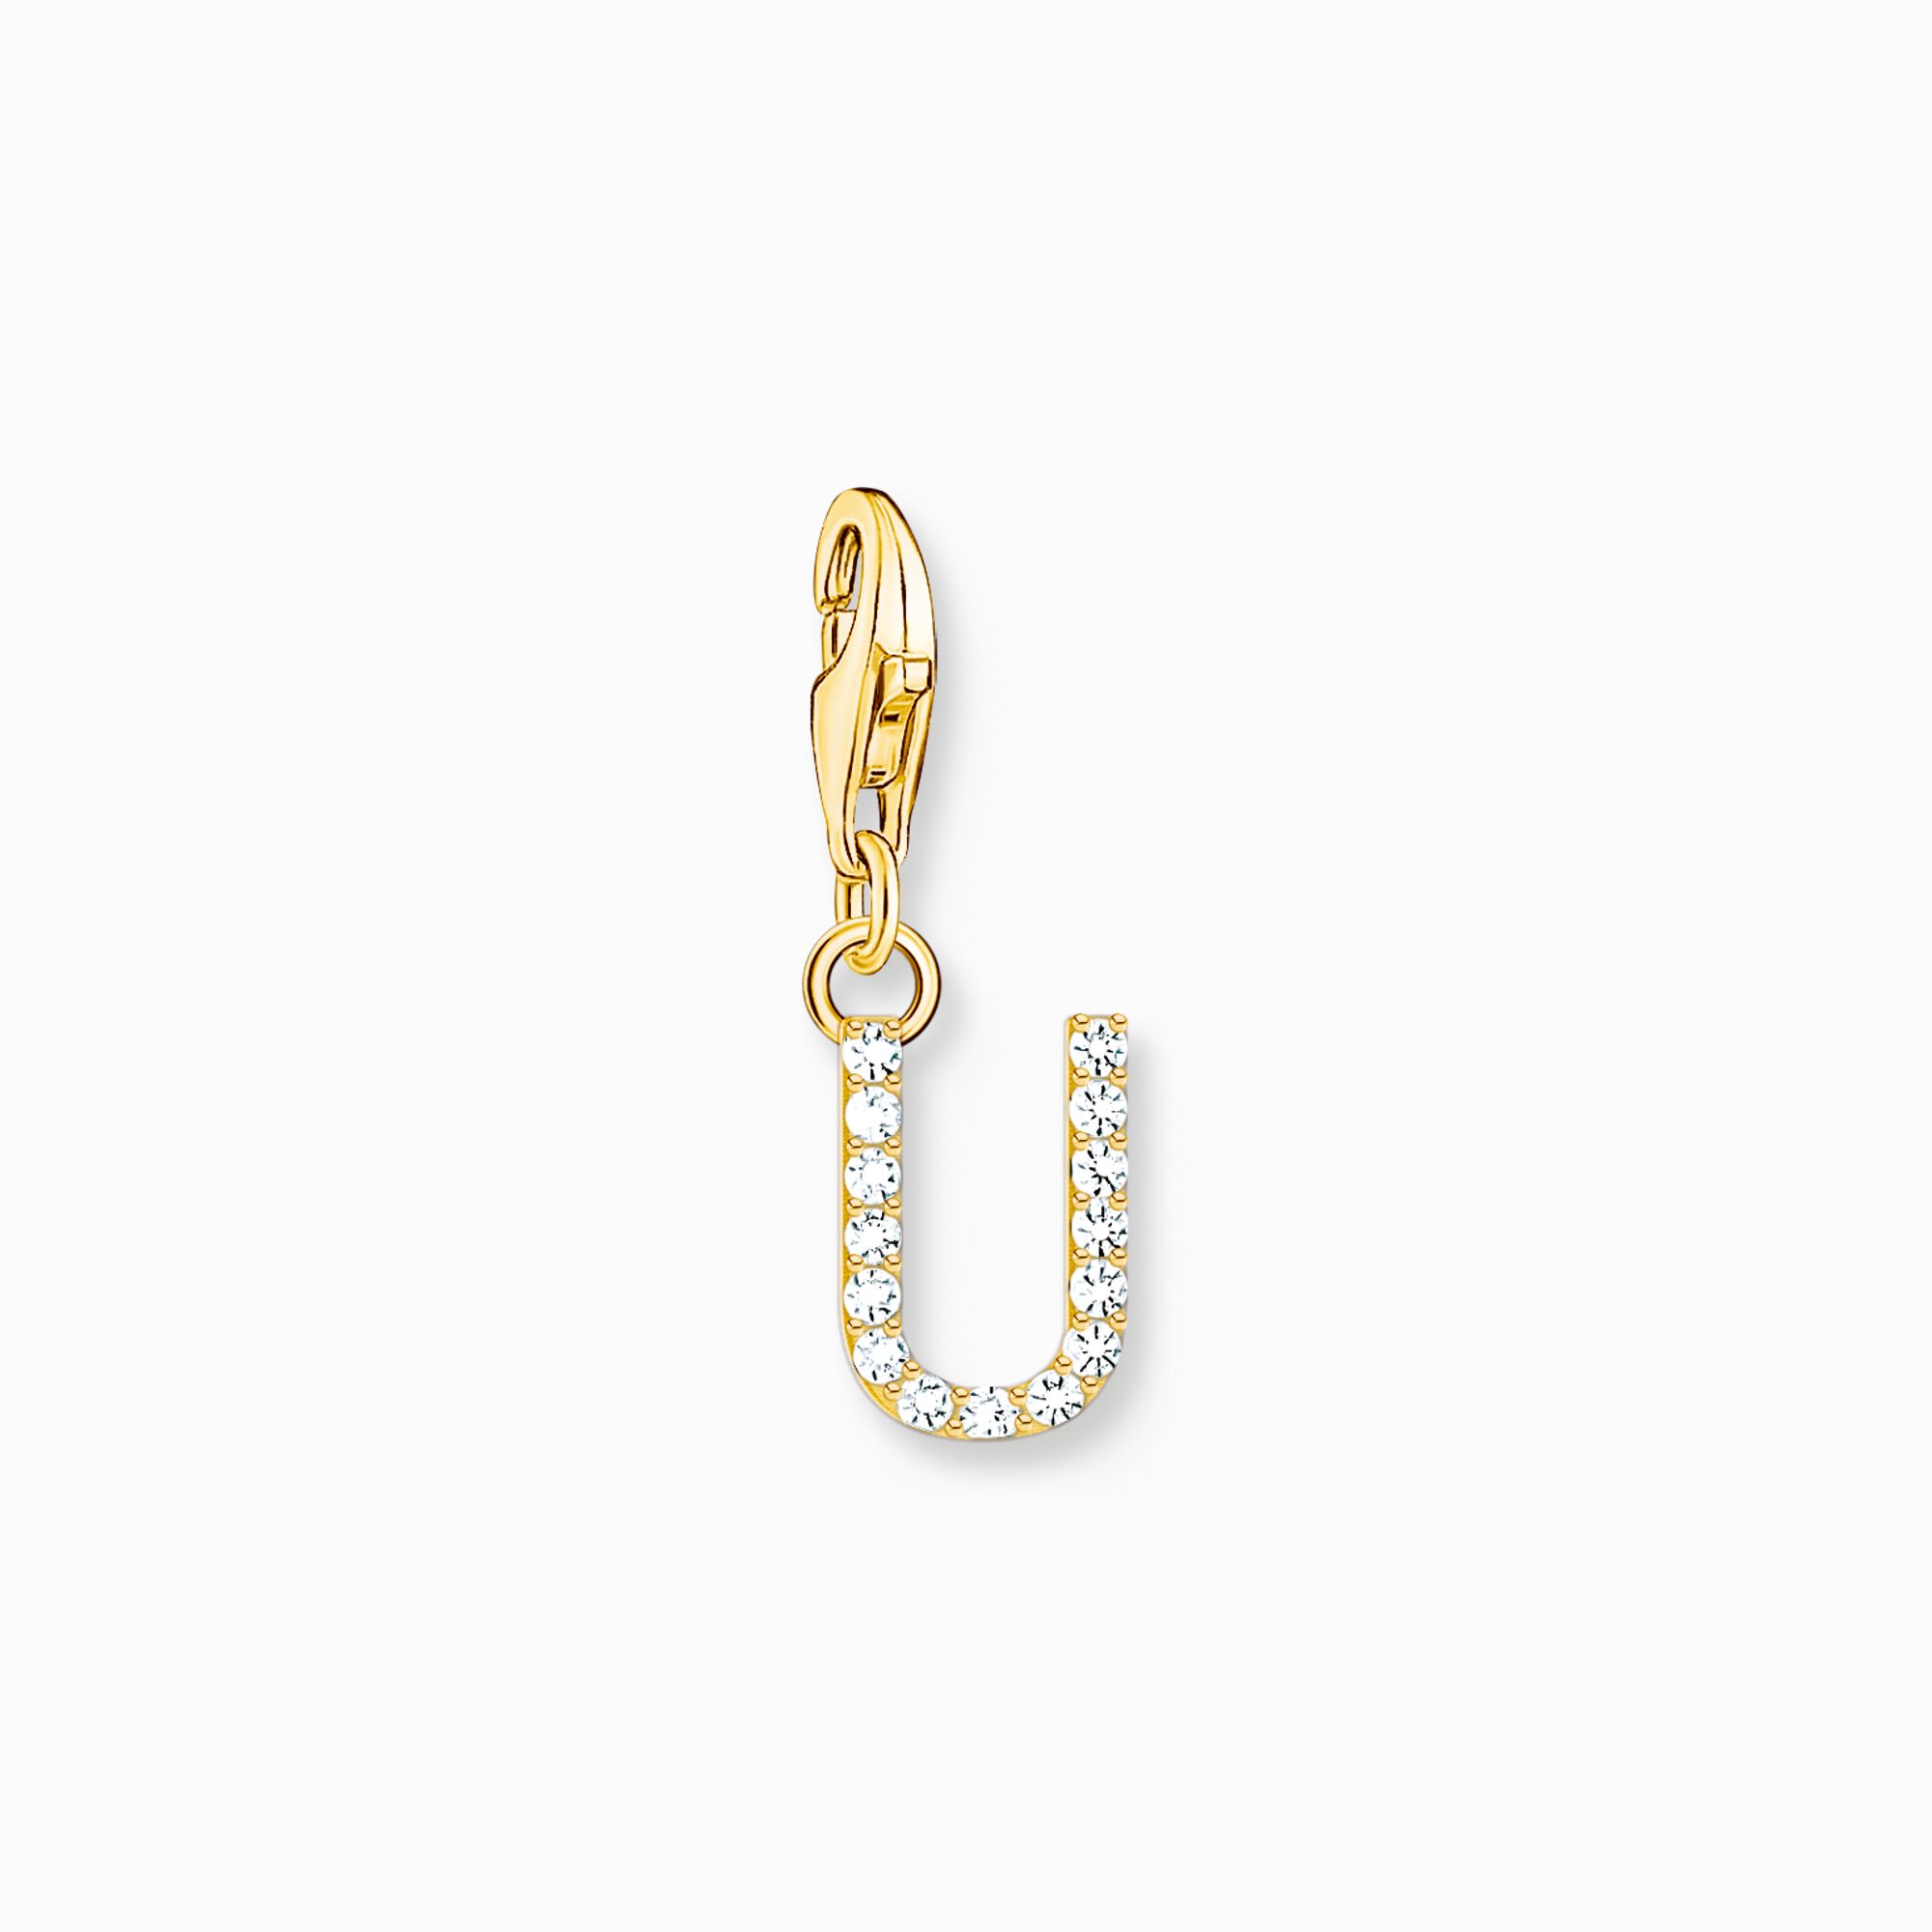 Charm pendant letter U with white stones gold plated from the Charm Club collection in the THOMAS SABO online store